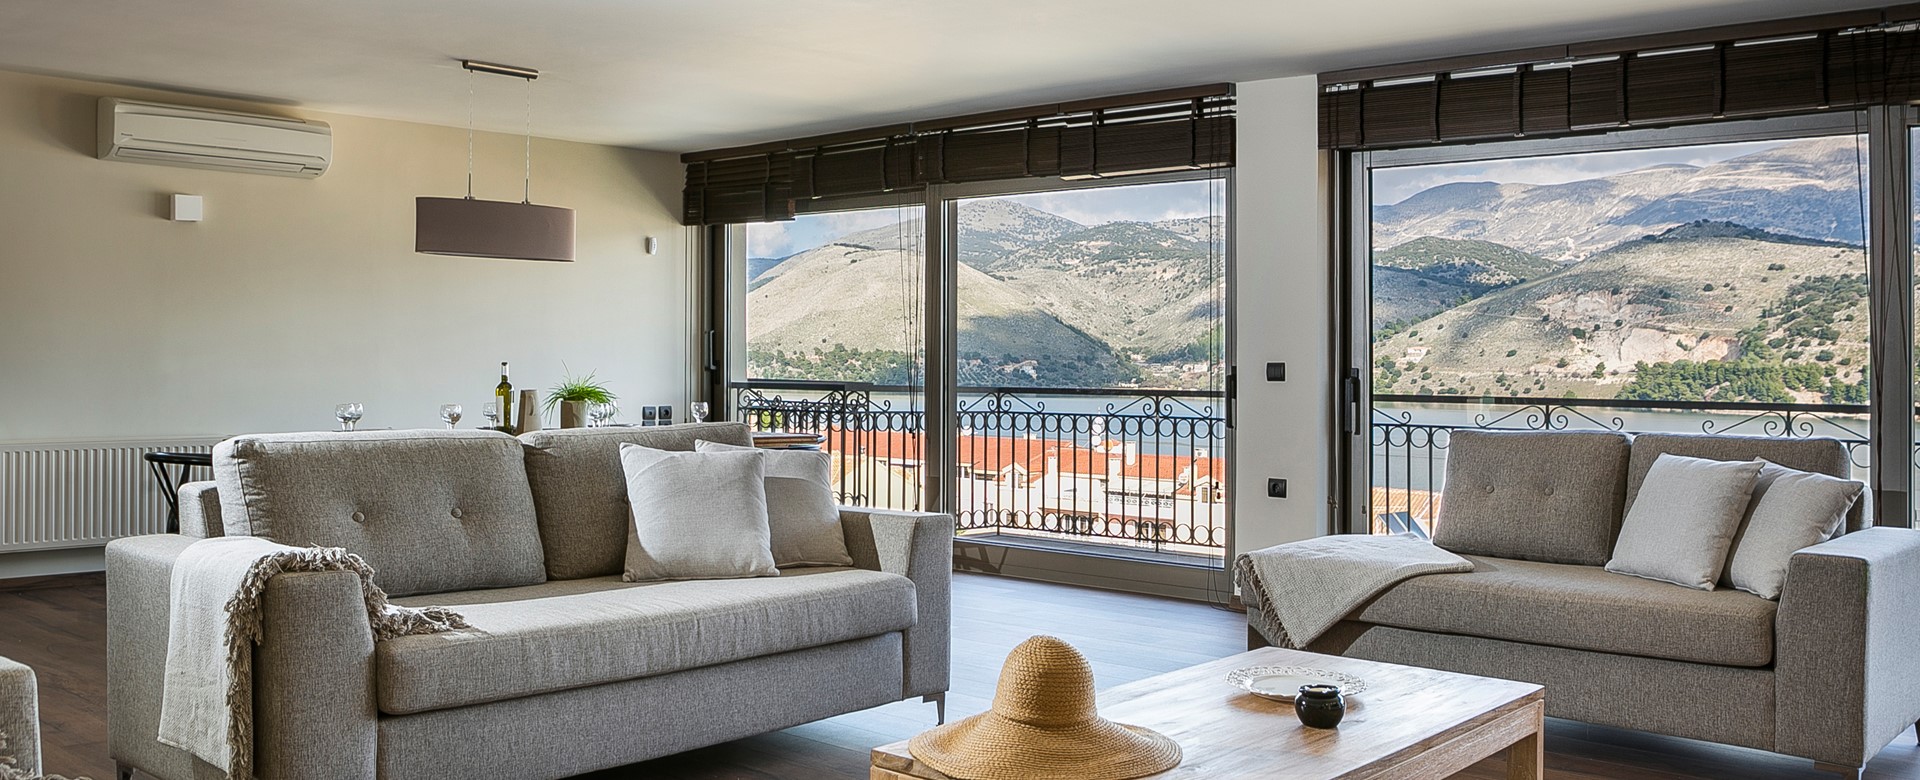 Panoramic views of the bay and surrounding hills inside or out on the balcony of Marina Penthouse Apartment, Argostoli, Kefalonia, Greek Islands